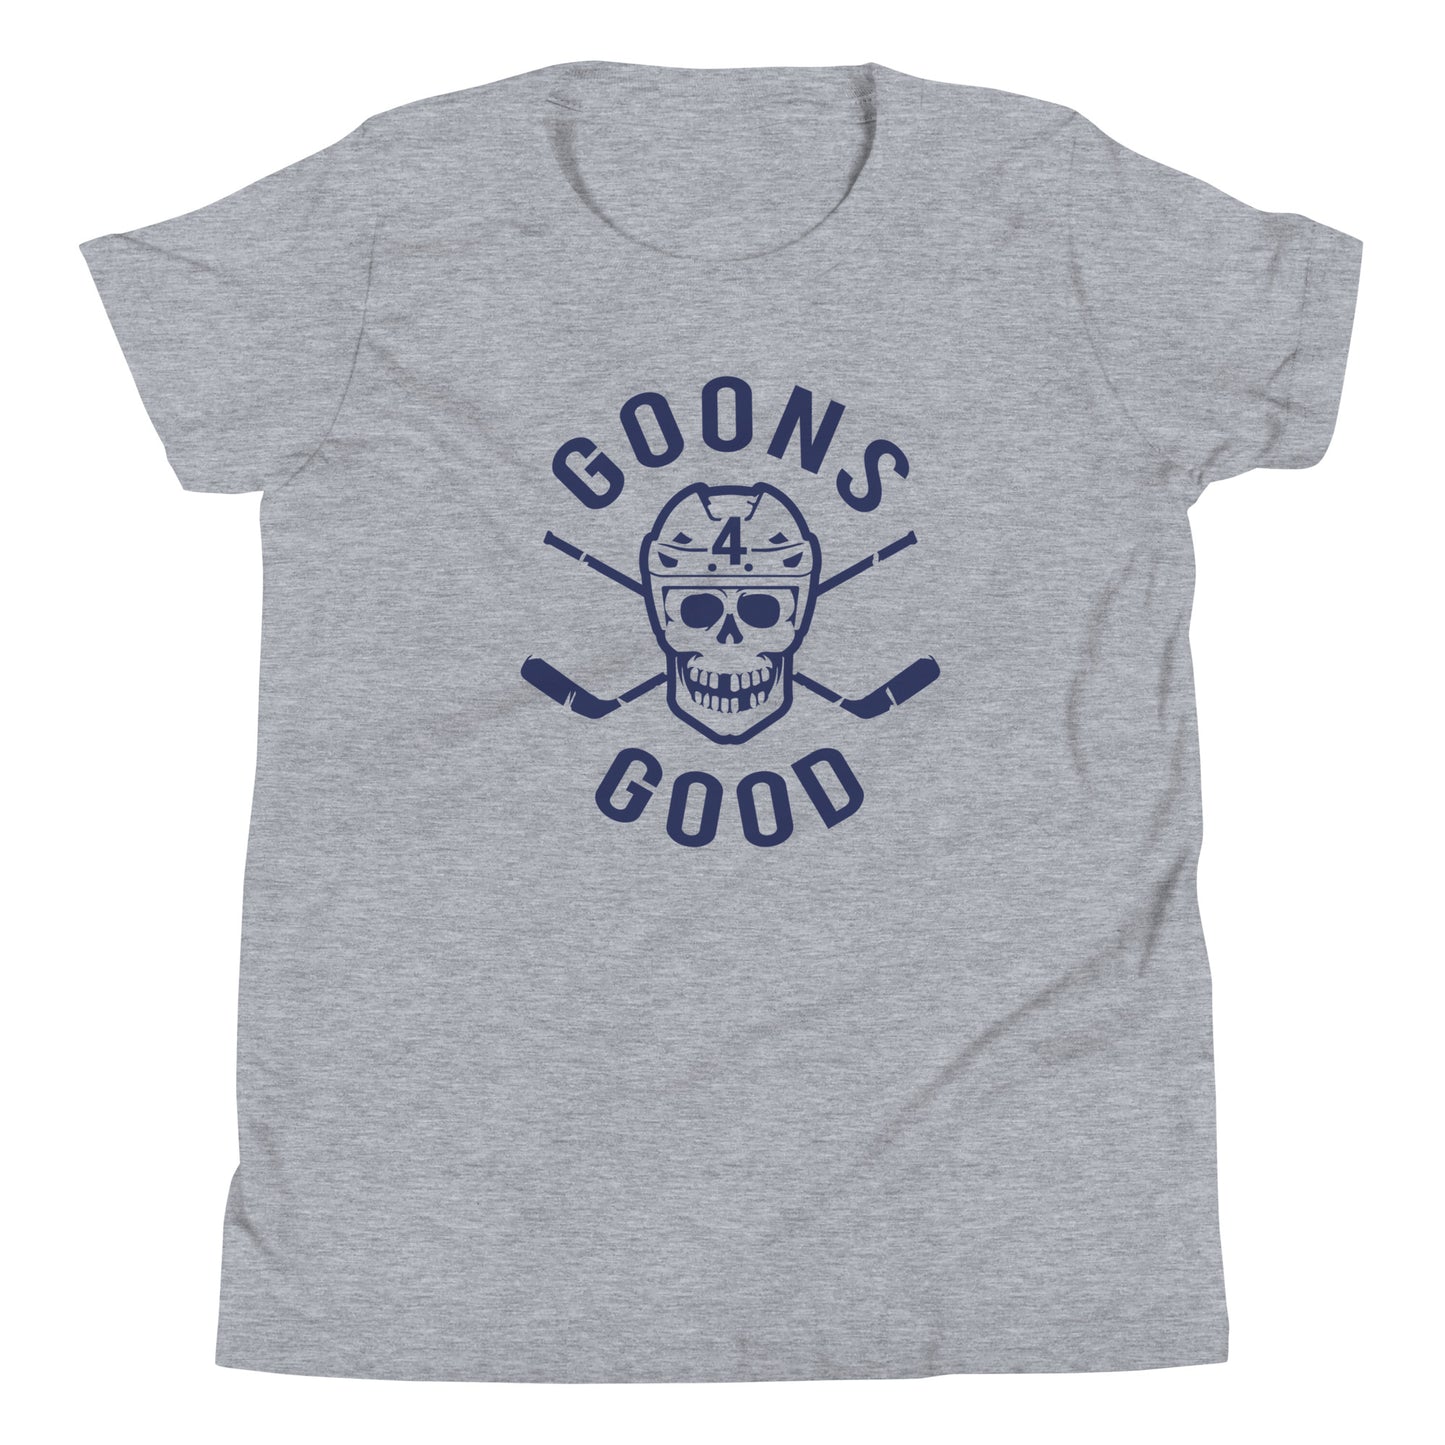 GOONS 4 GOOD | YOUTH SIZE | T-SHIRT